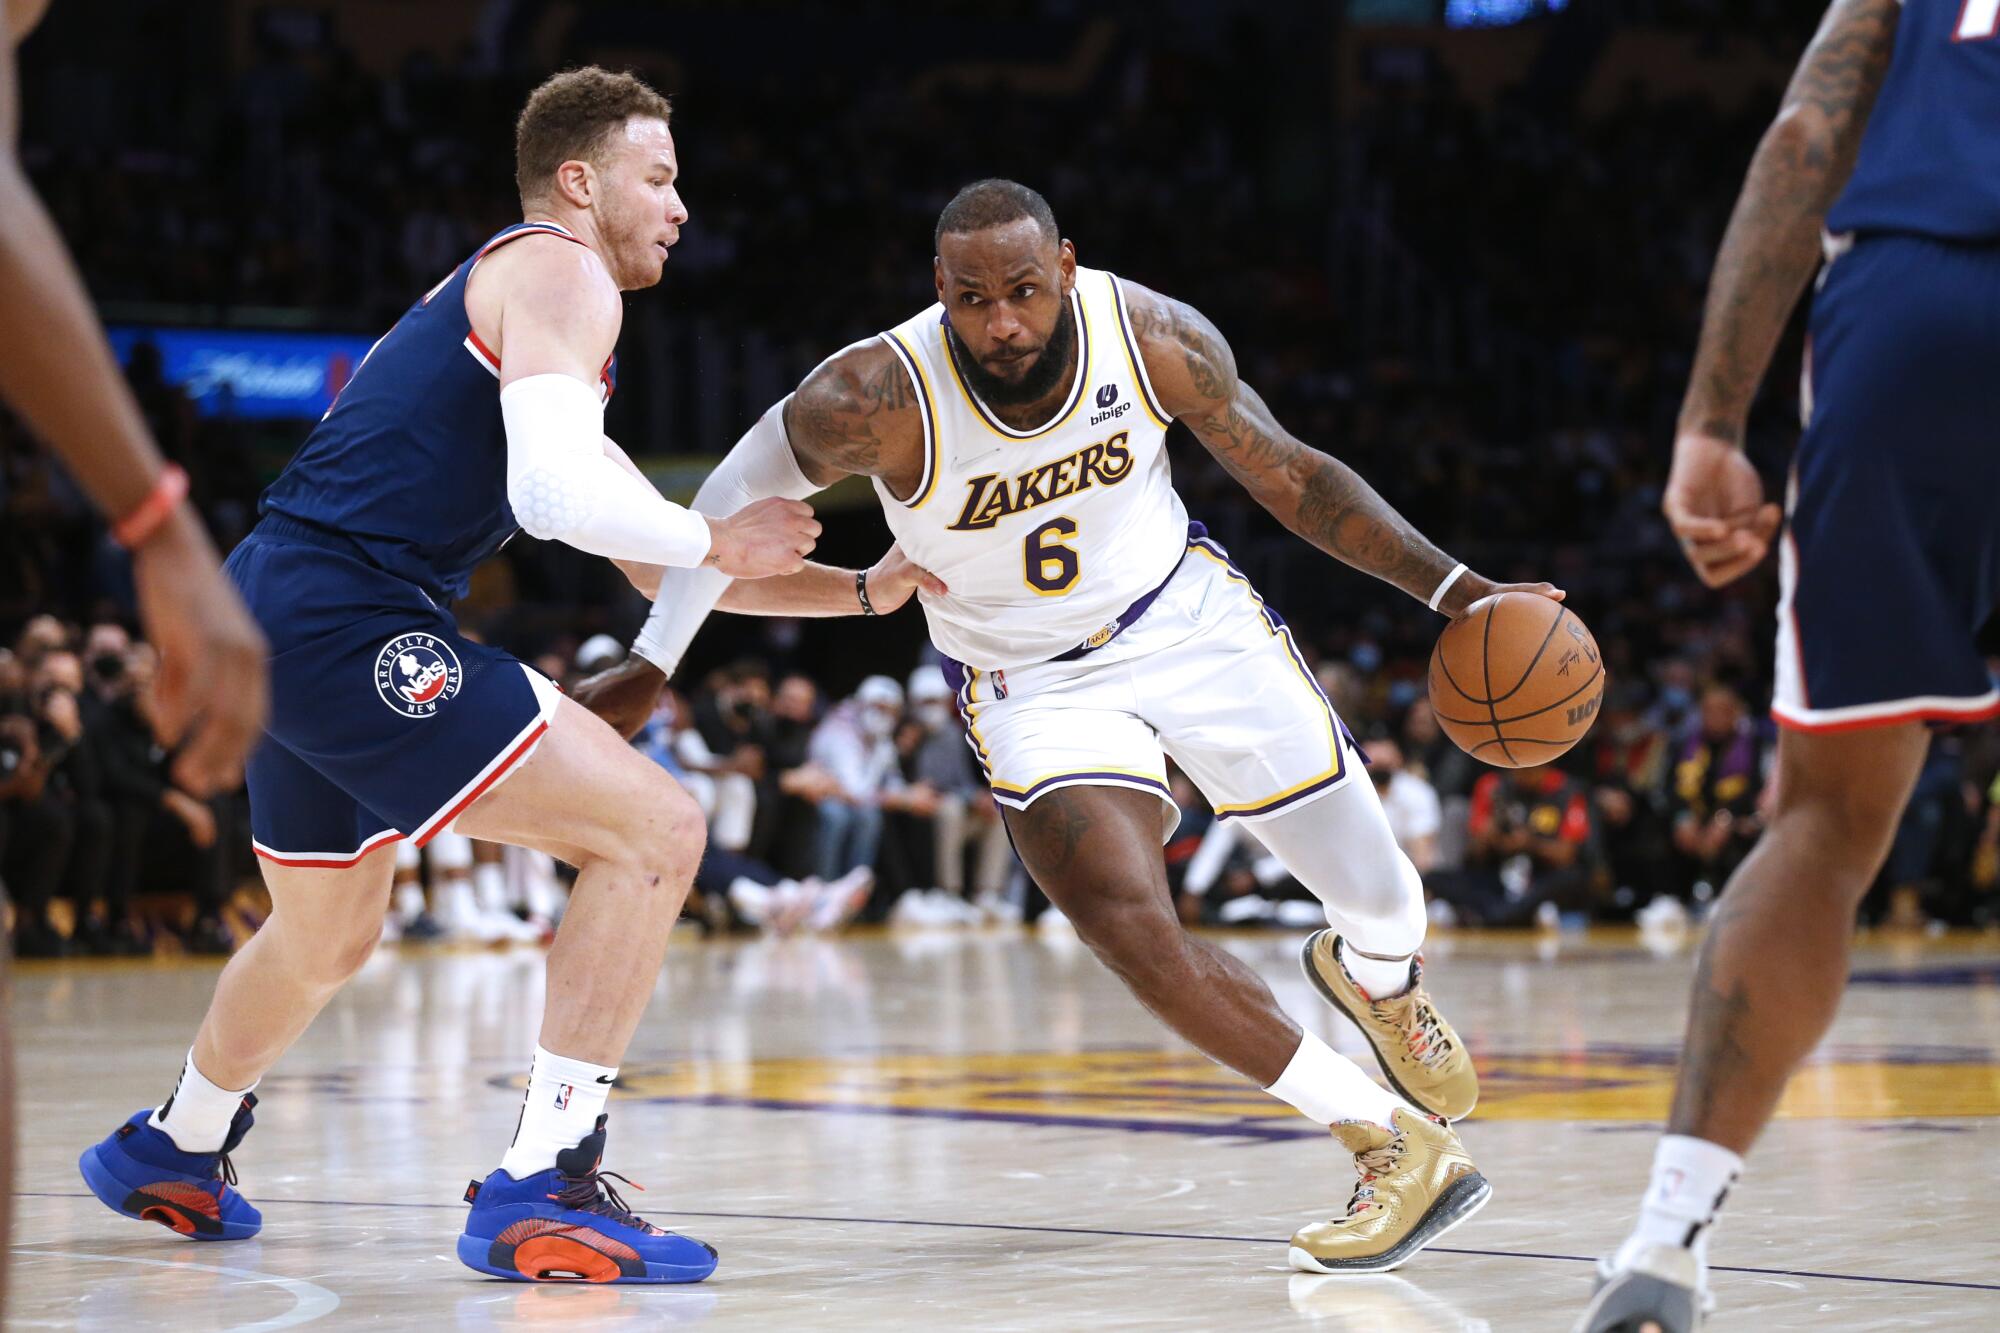 Lakers forward LeBron James, right, tries to drive past Brooklyn Nets forward Blake Griffin in the first half.